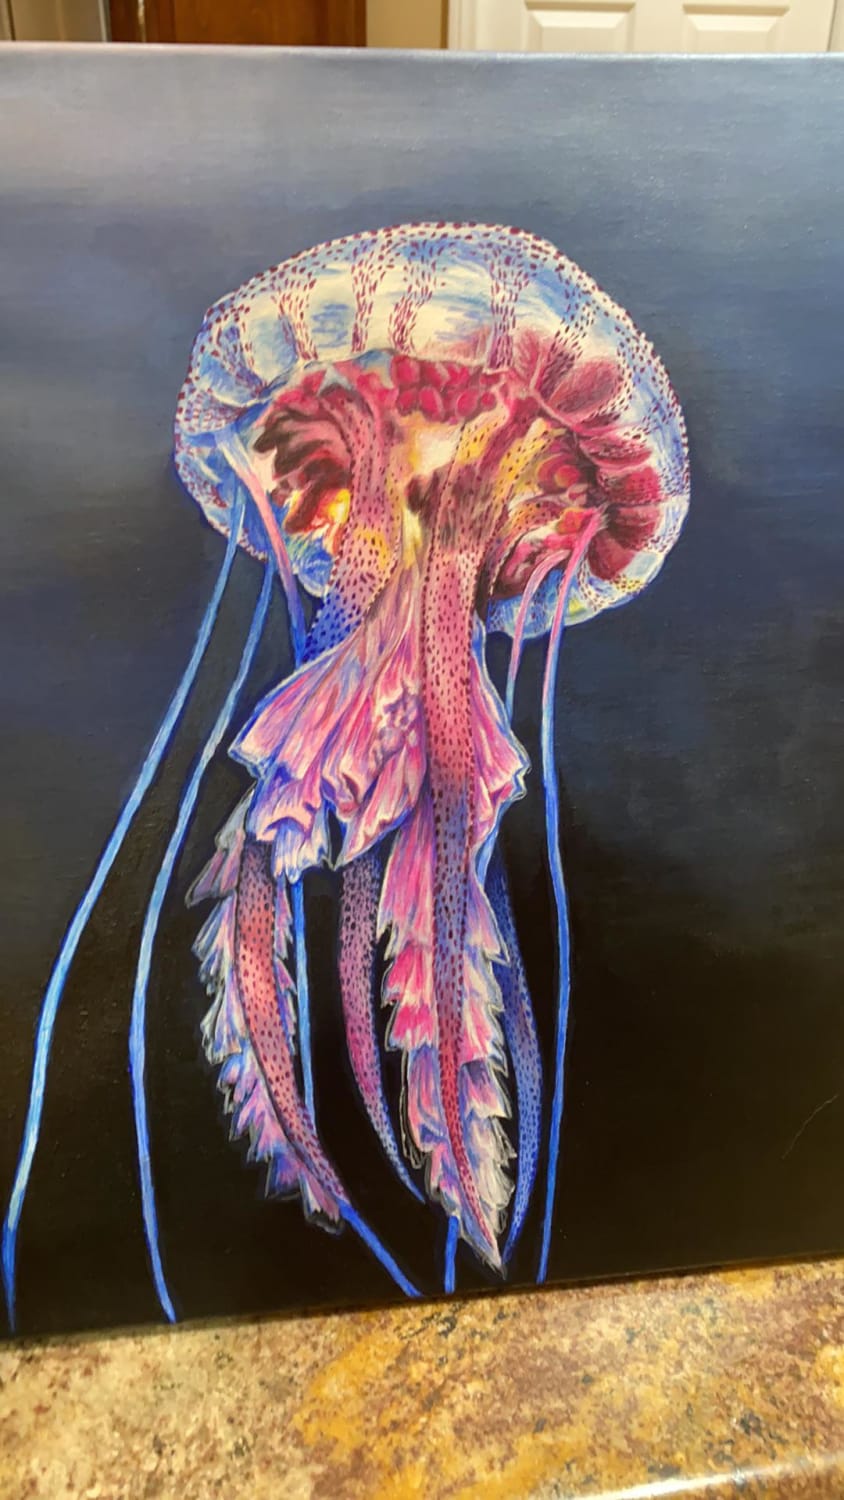 I’m a disabled artist. I can’t use my hands very well so drawing and painting is rare for me. I feel really proud of thisacrylic Jellyfish I finished this week.